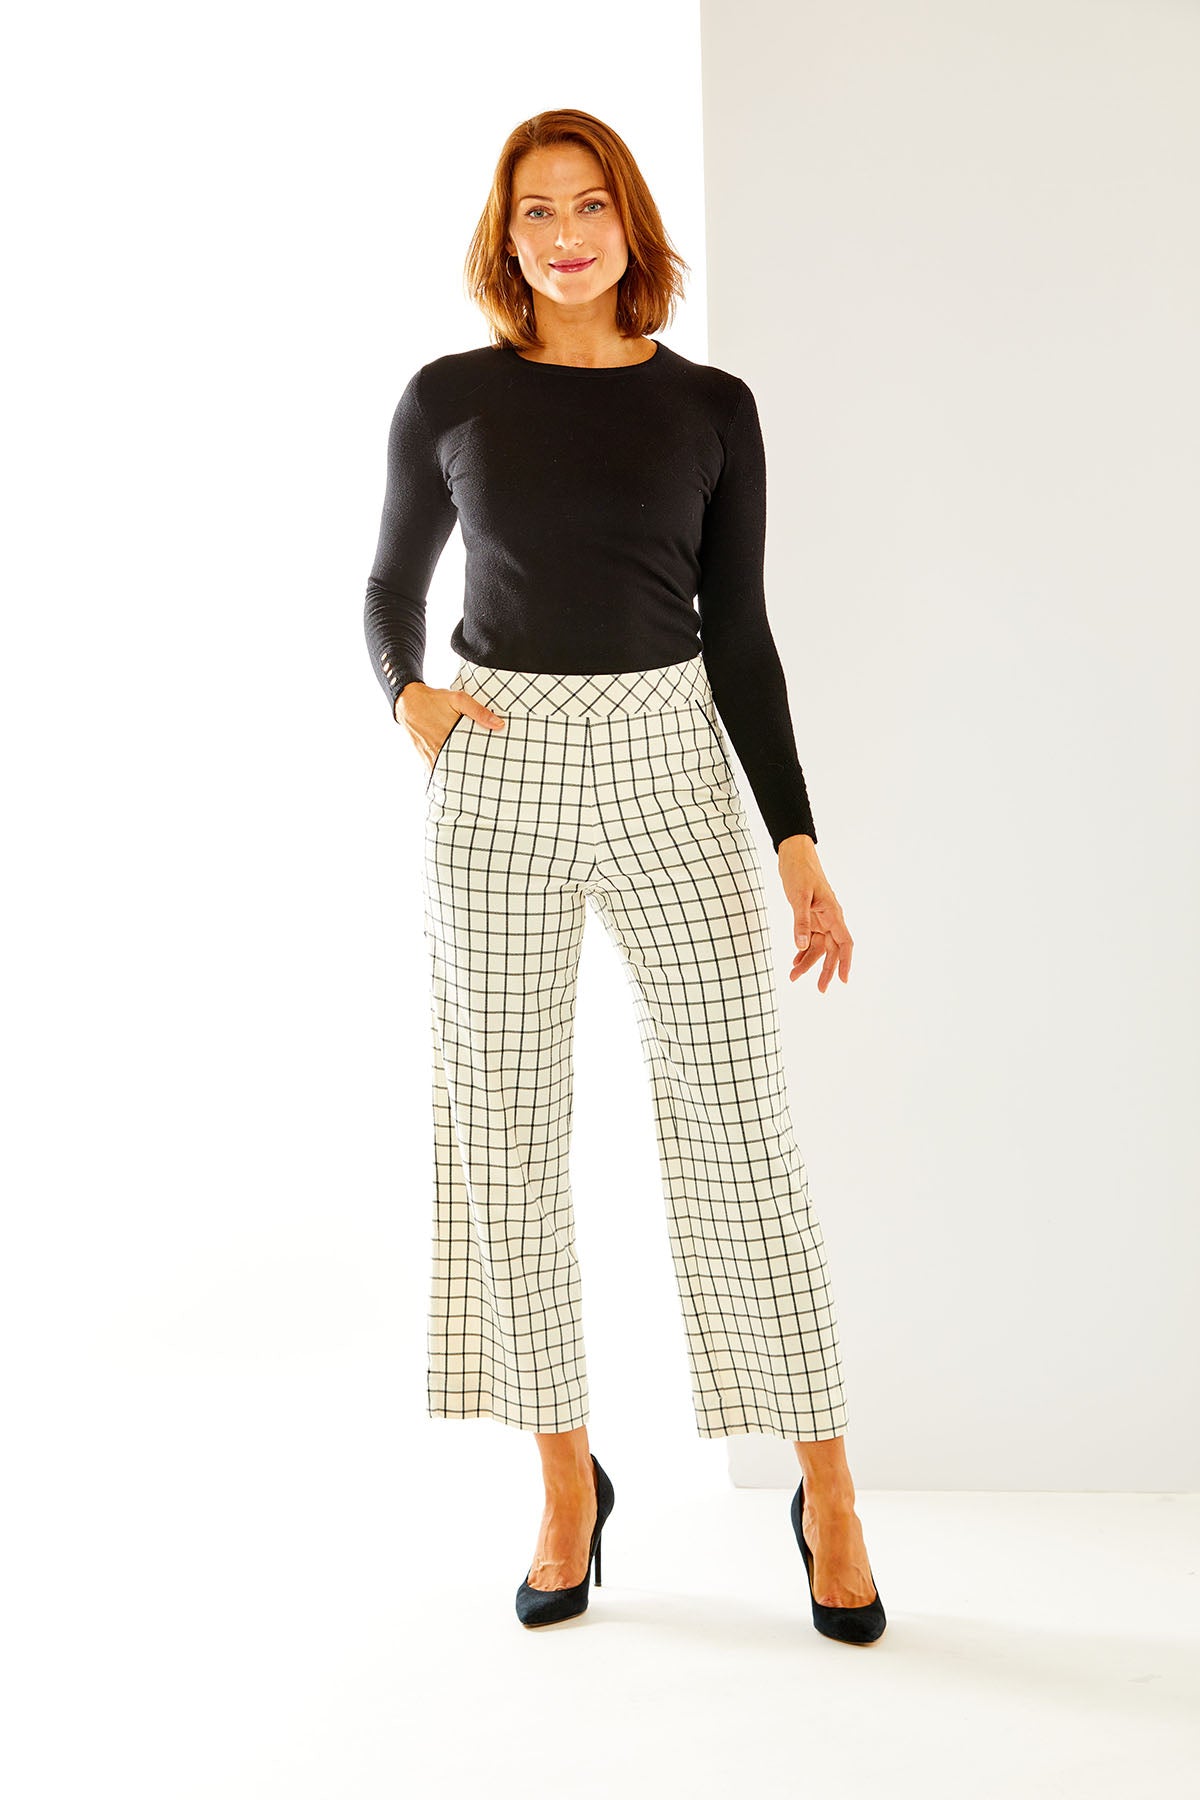 Woman in plaid pant